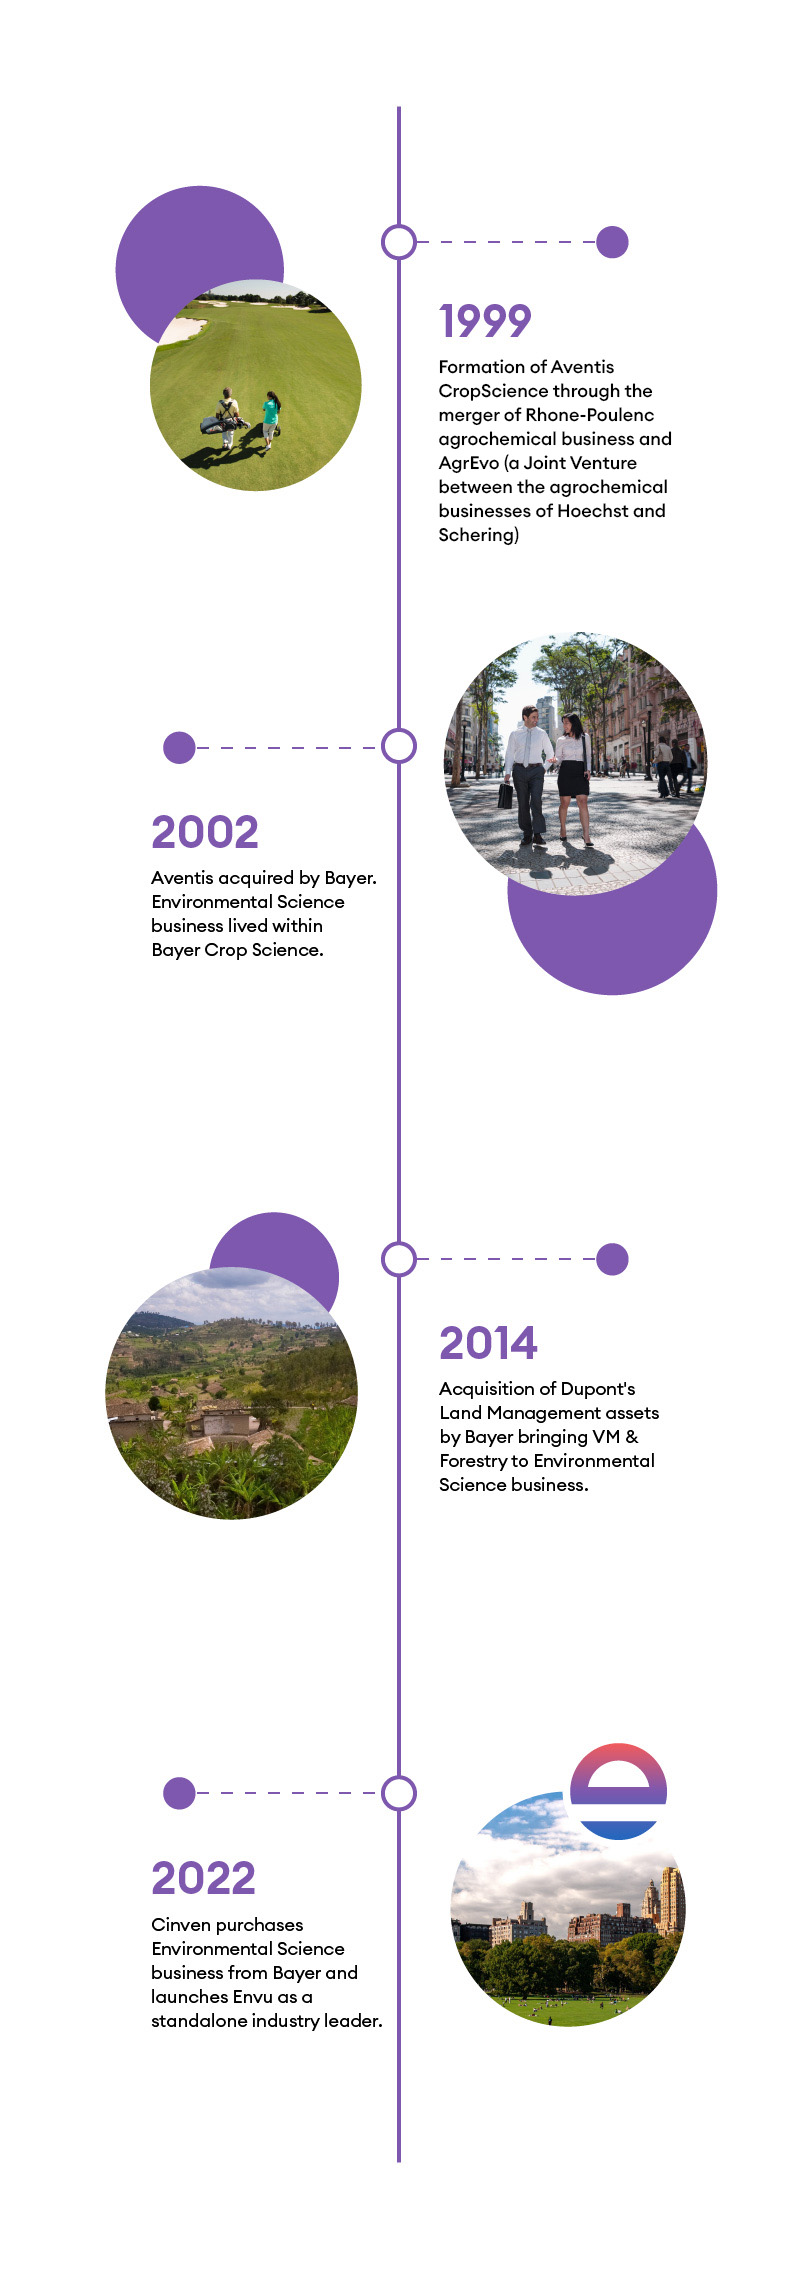 Timeline graphic showing Envu history from 1999 to 2022